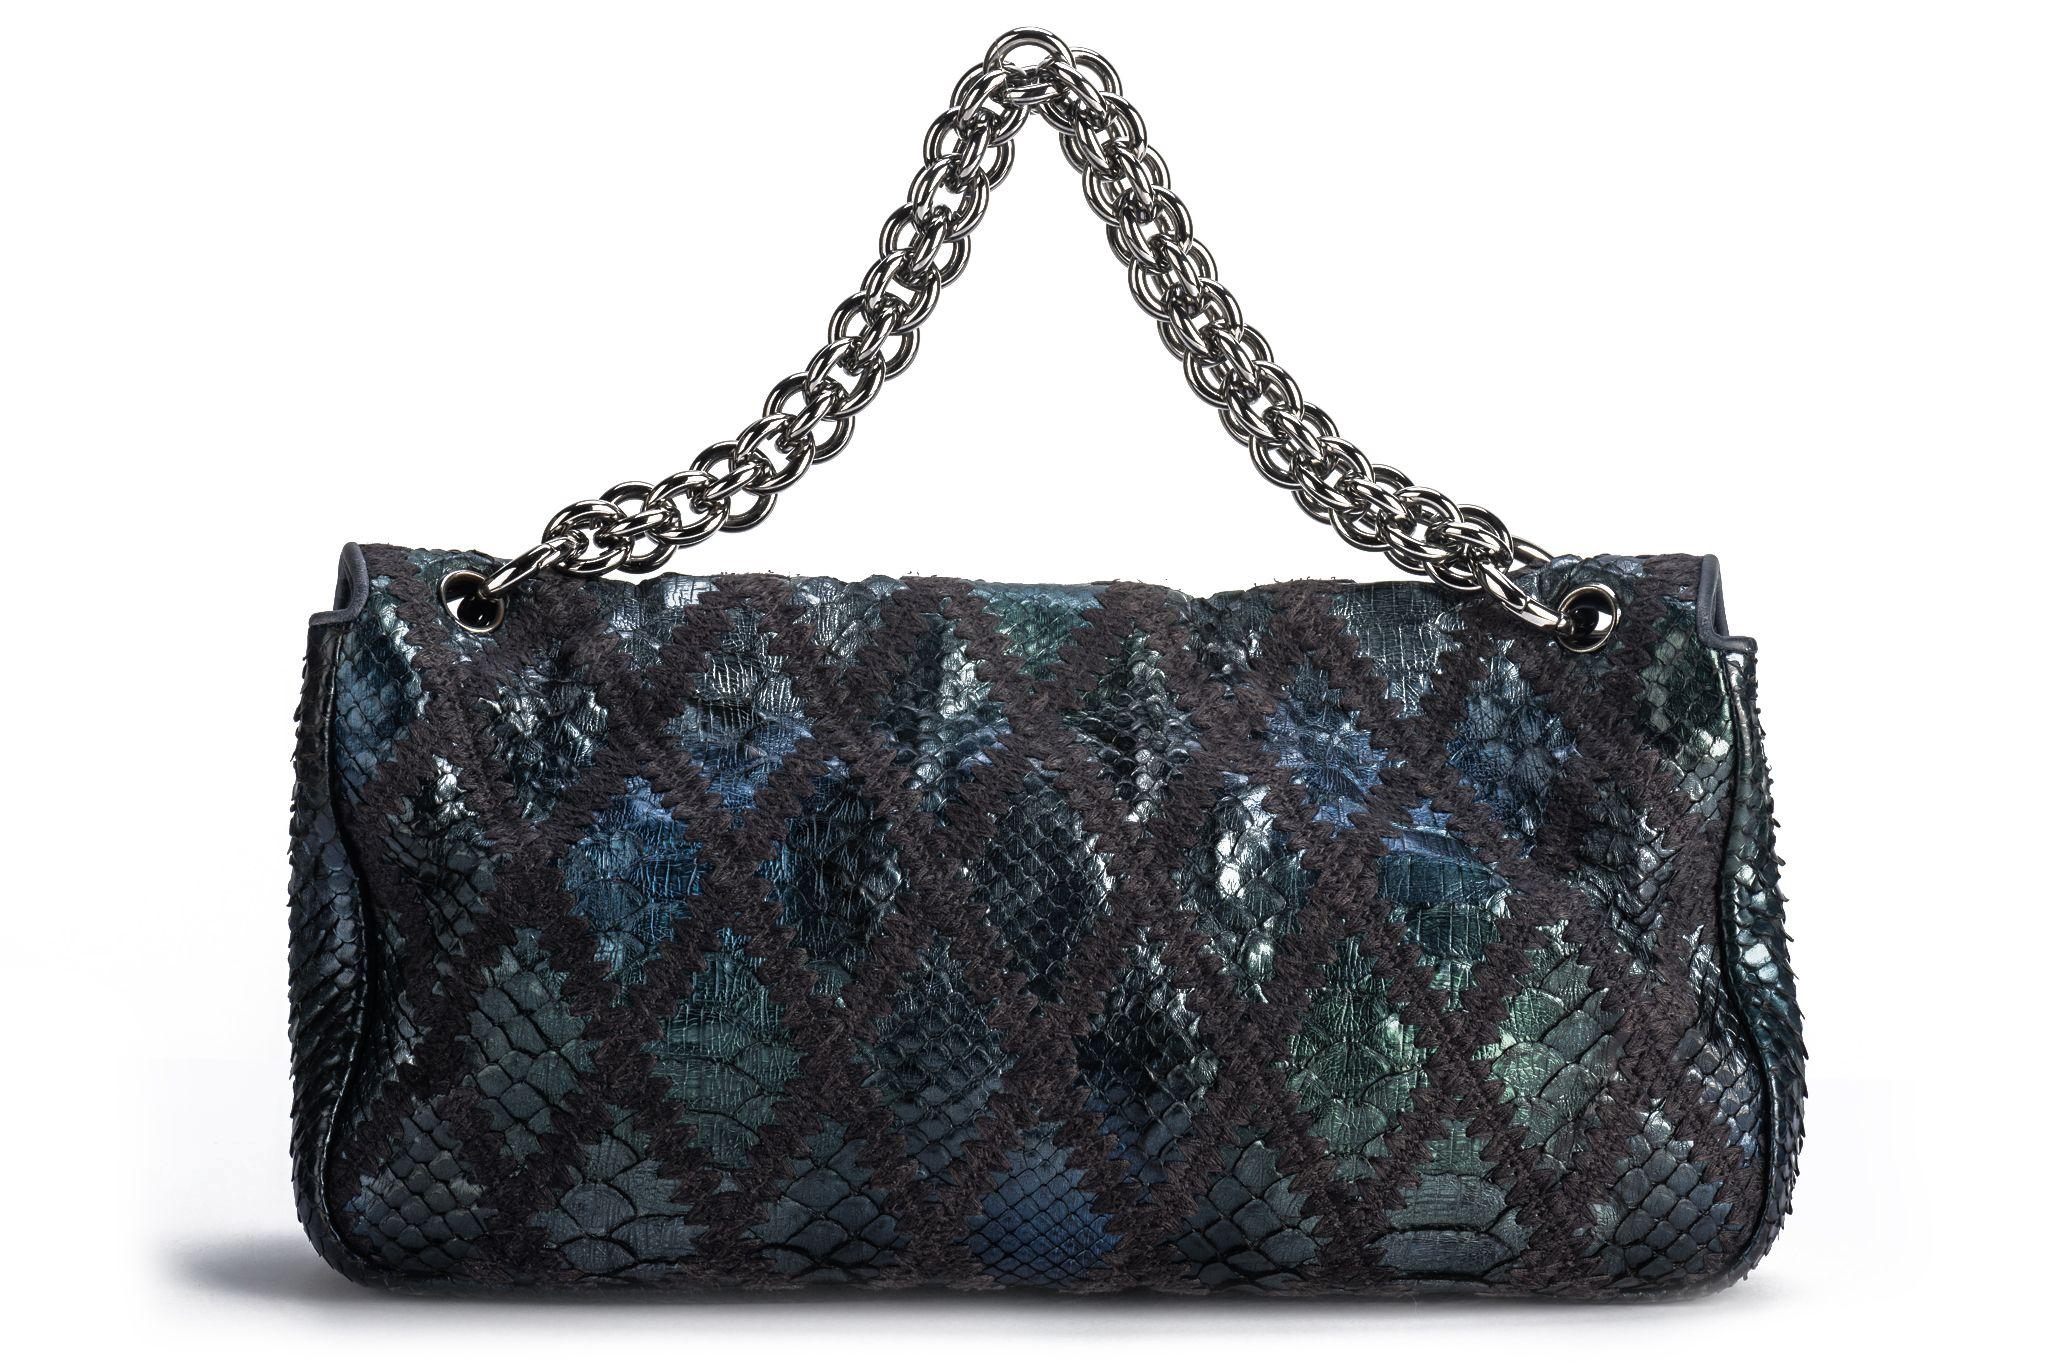 Chanel Maxi Navy Black Python Bag In Excellent Condition For Sale In West Hollywood, CA